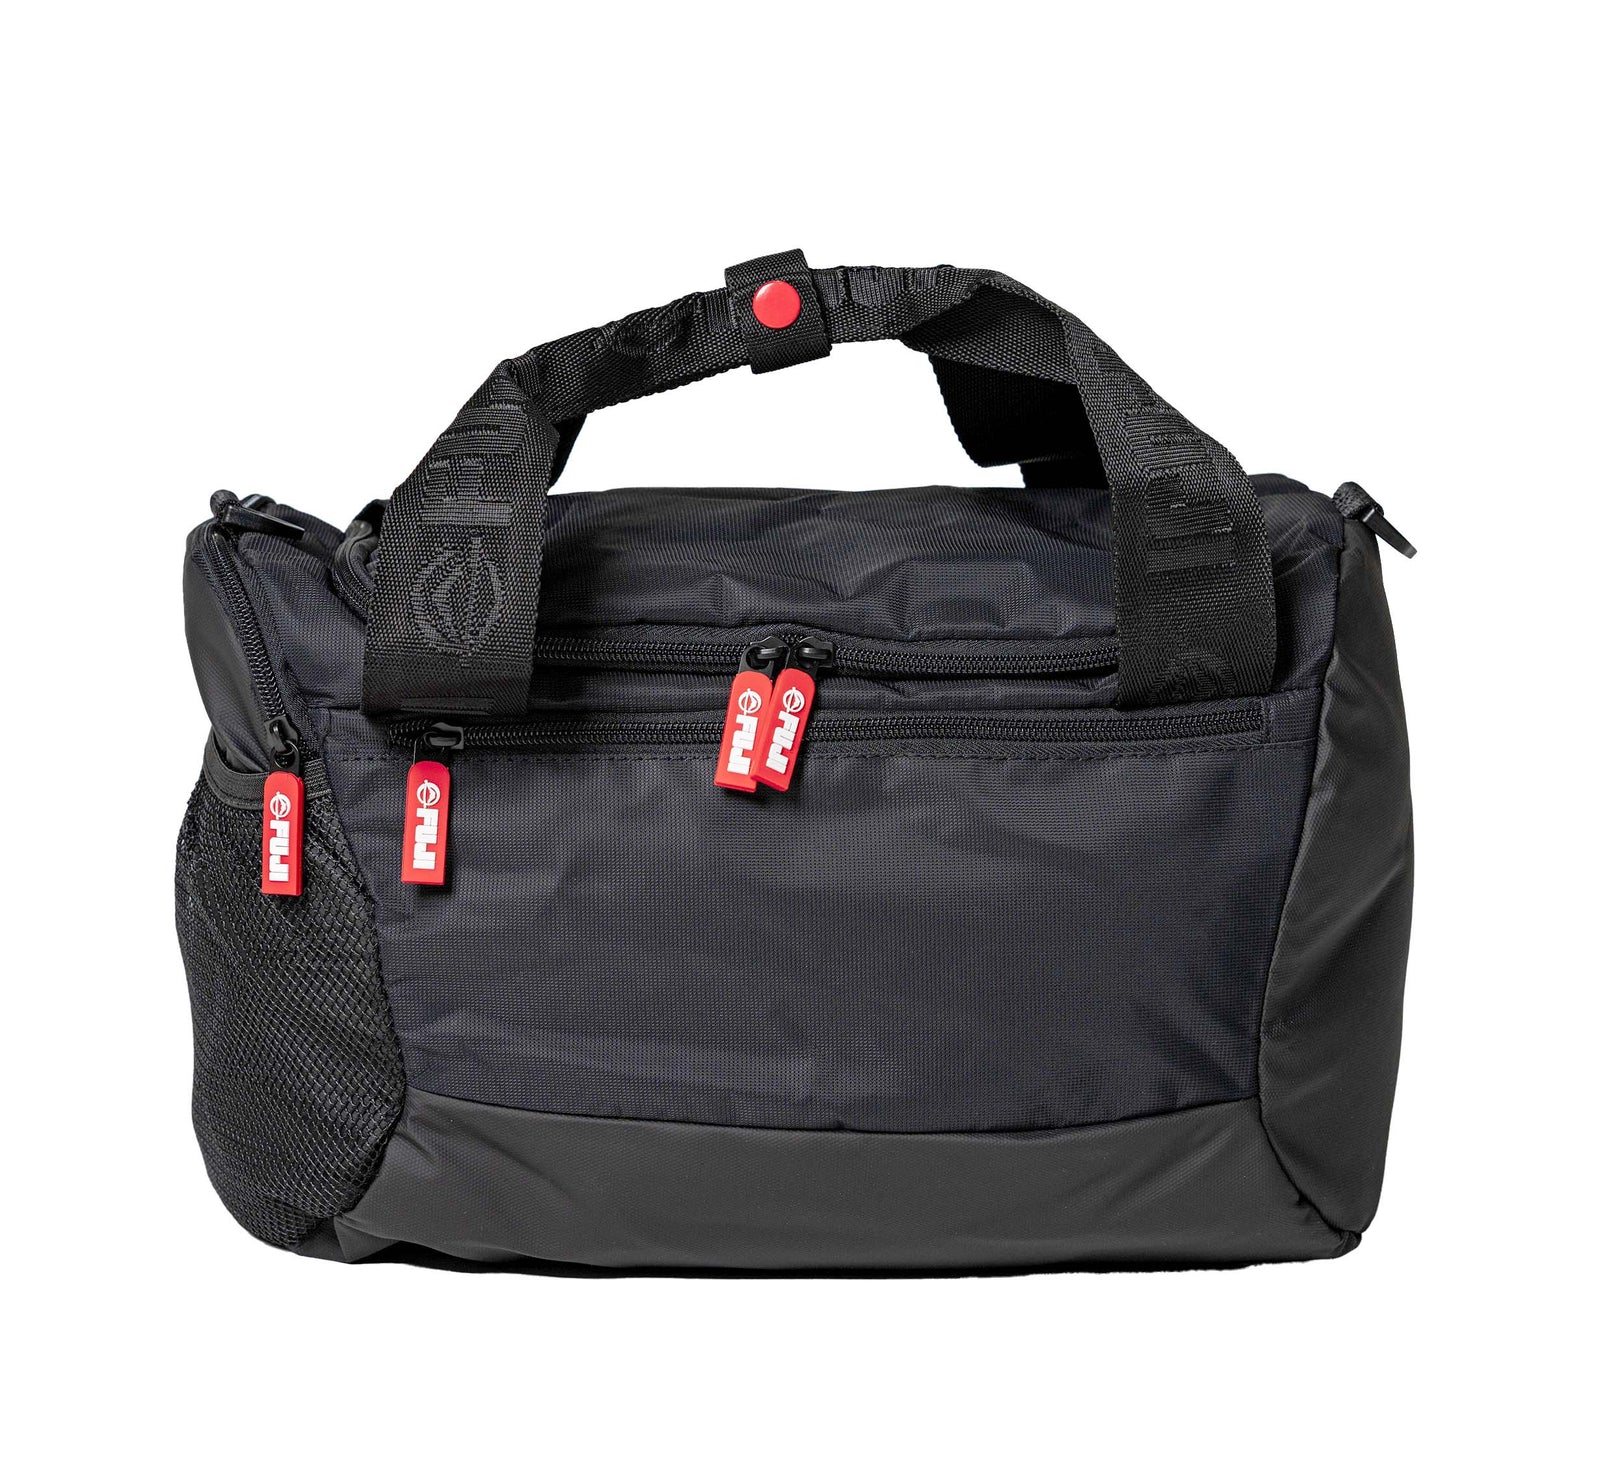 Buy HRS Academy Backpack Kit Bag at Lowest Prices - Sportsuncle.com